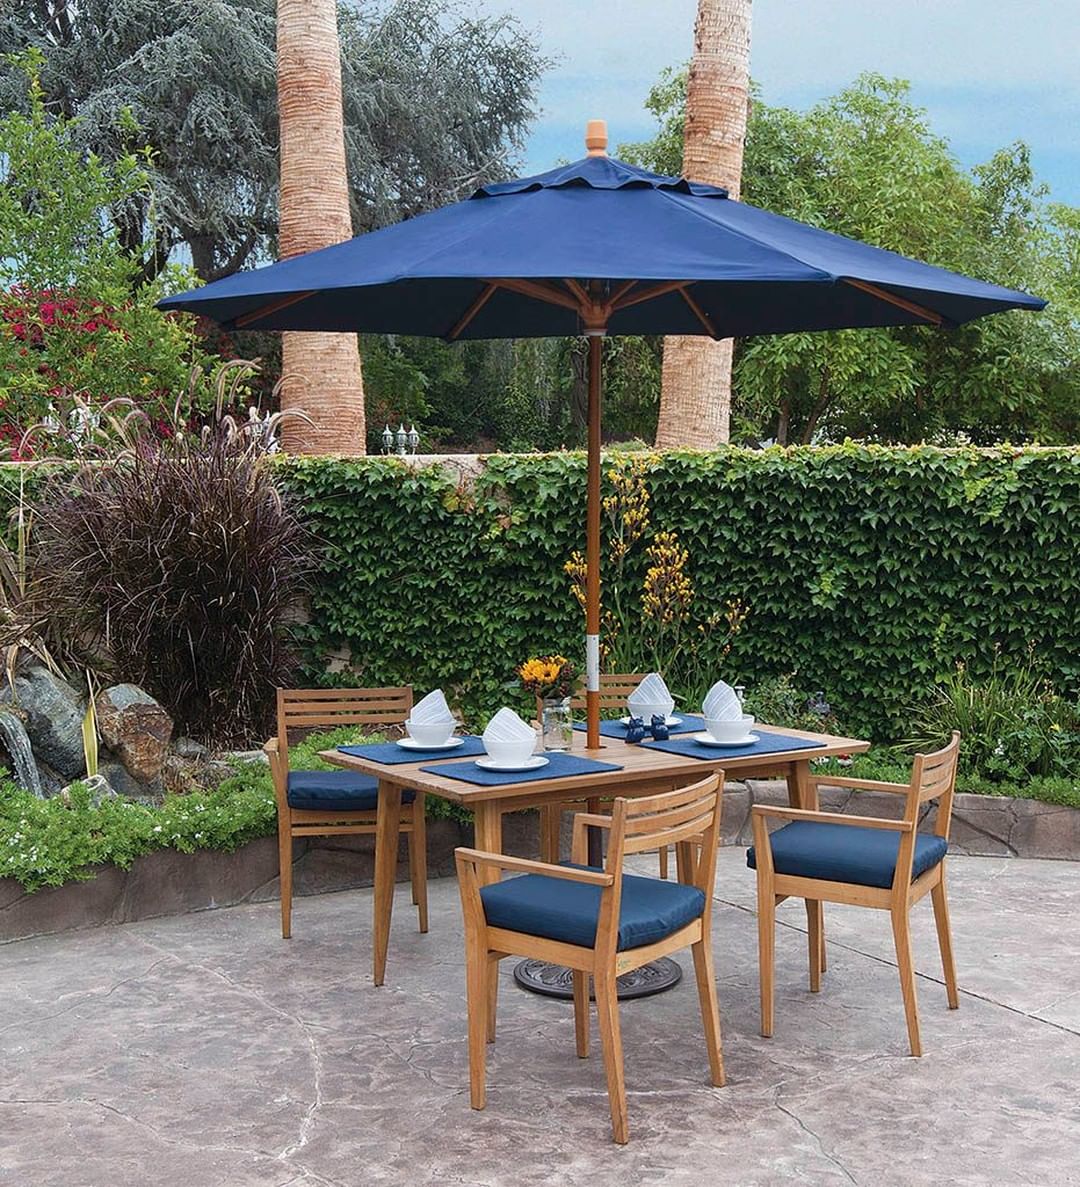 Outdoor Dining Set with Umbrella. Photo by Instagram user @islandtrading